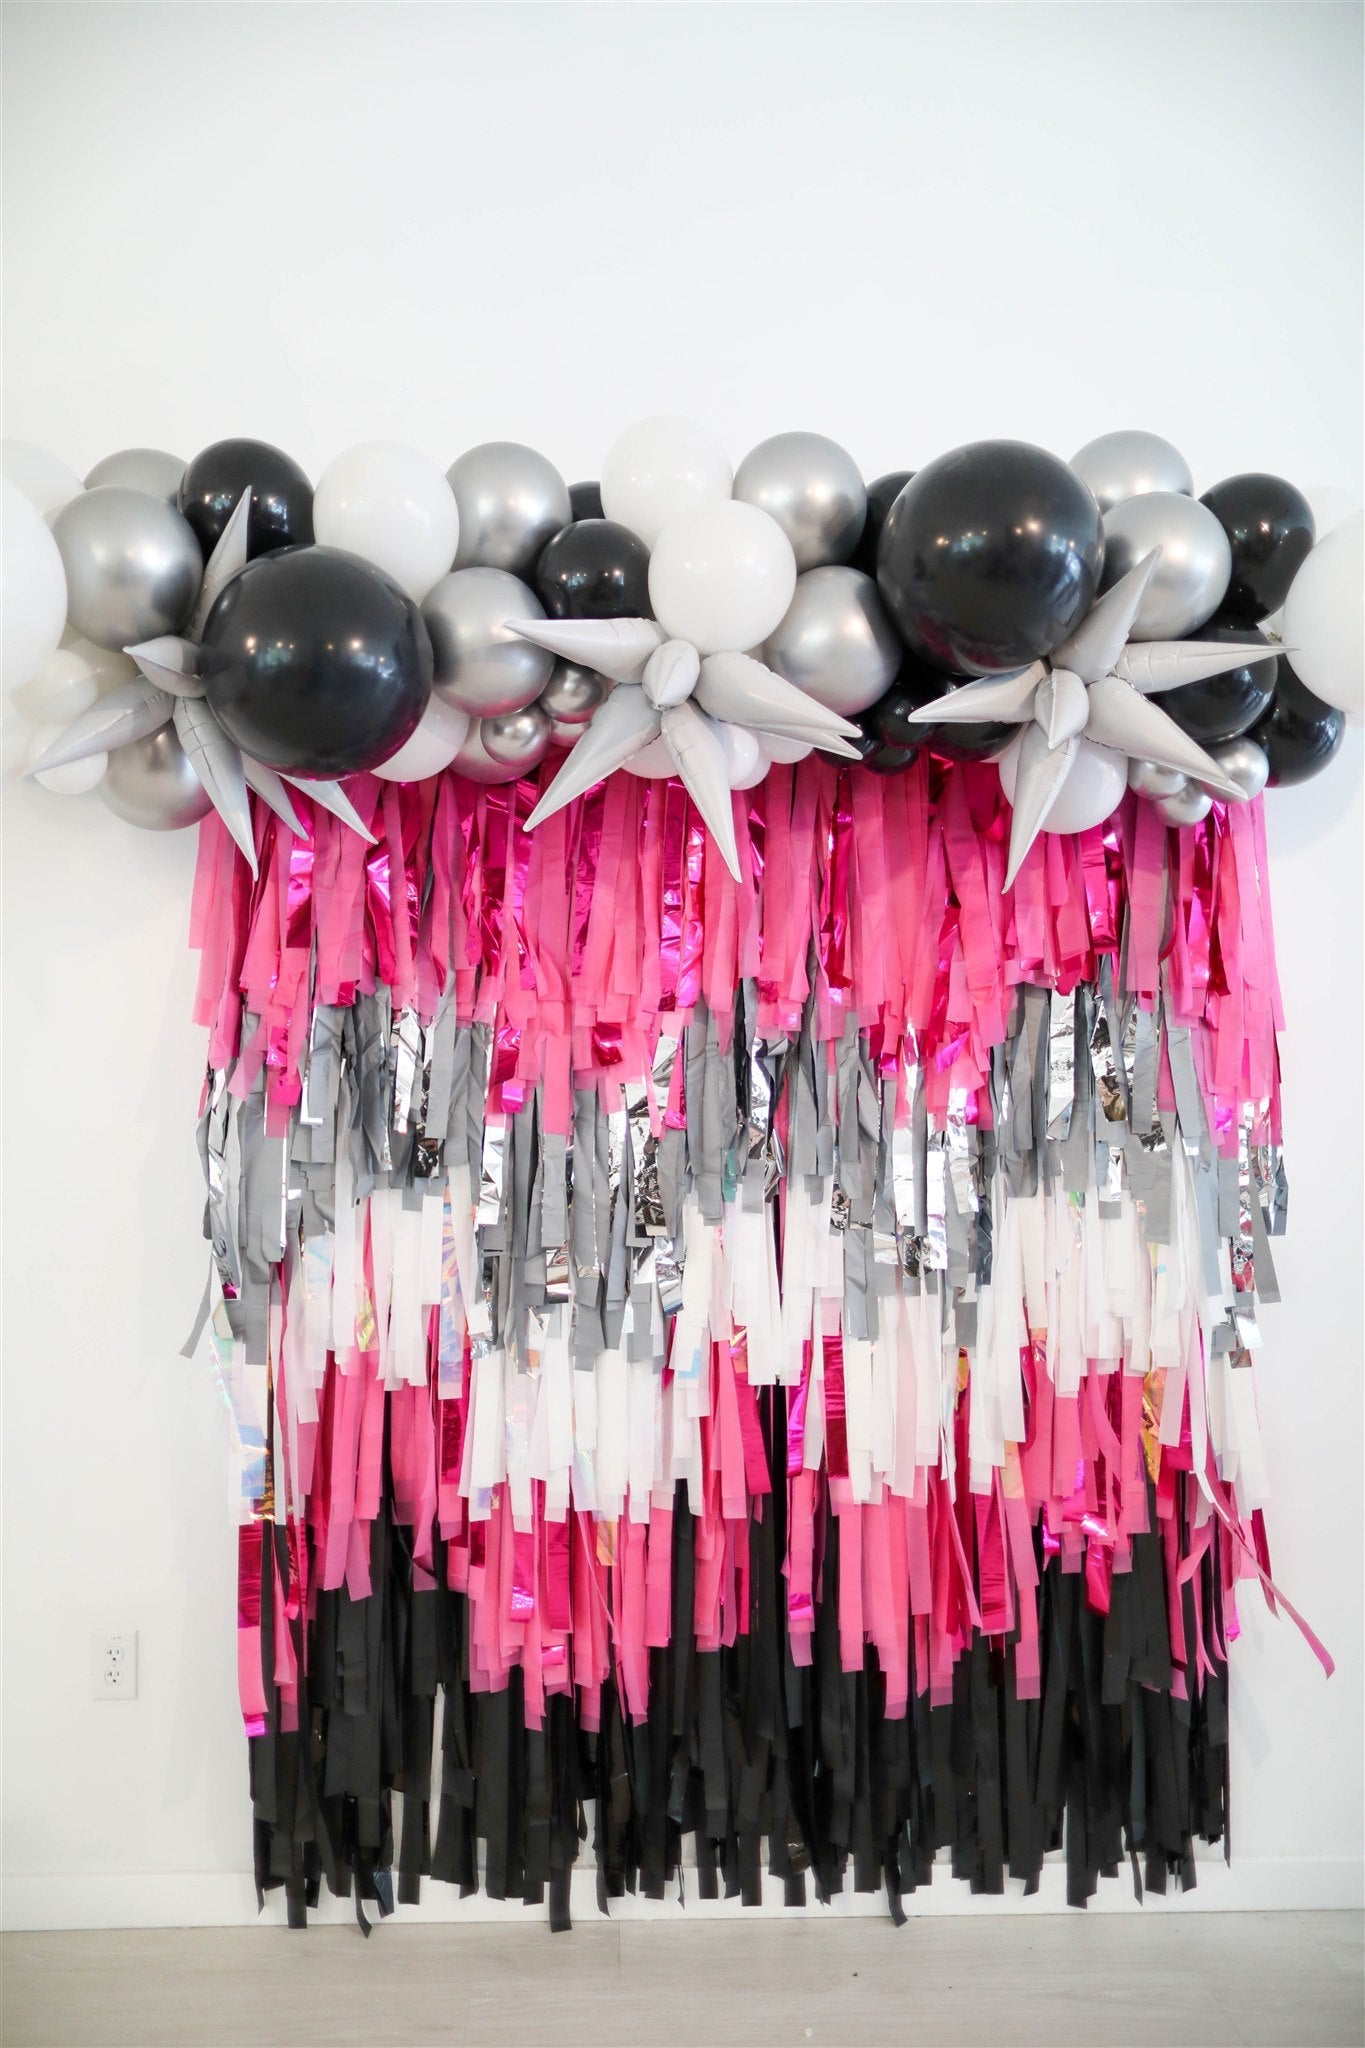 All That Glitters Fringe Backdrop - Oh My Darling Party Co-25th anniversary50th party decoranniversary decor #Fringe_Backdrop#